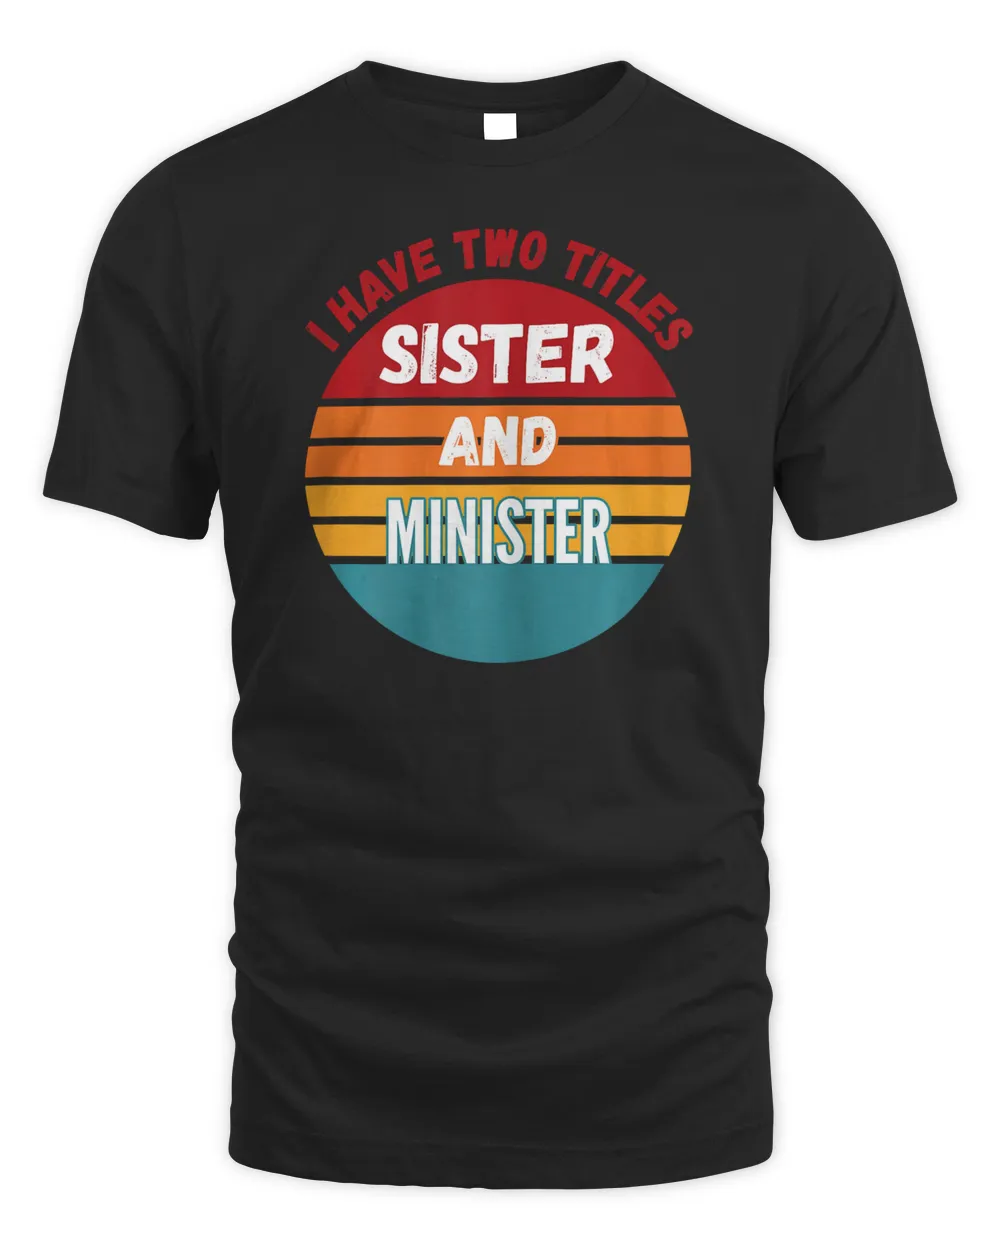 I Have Two Titles Sister And Minister T-Shirt